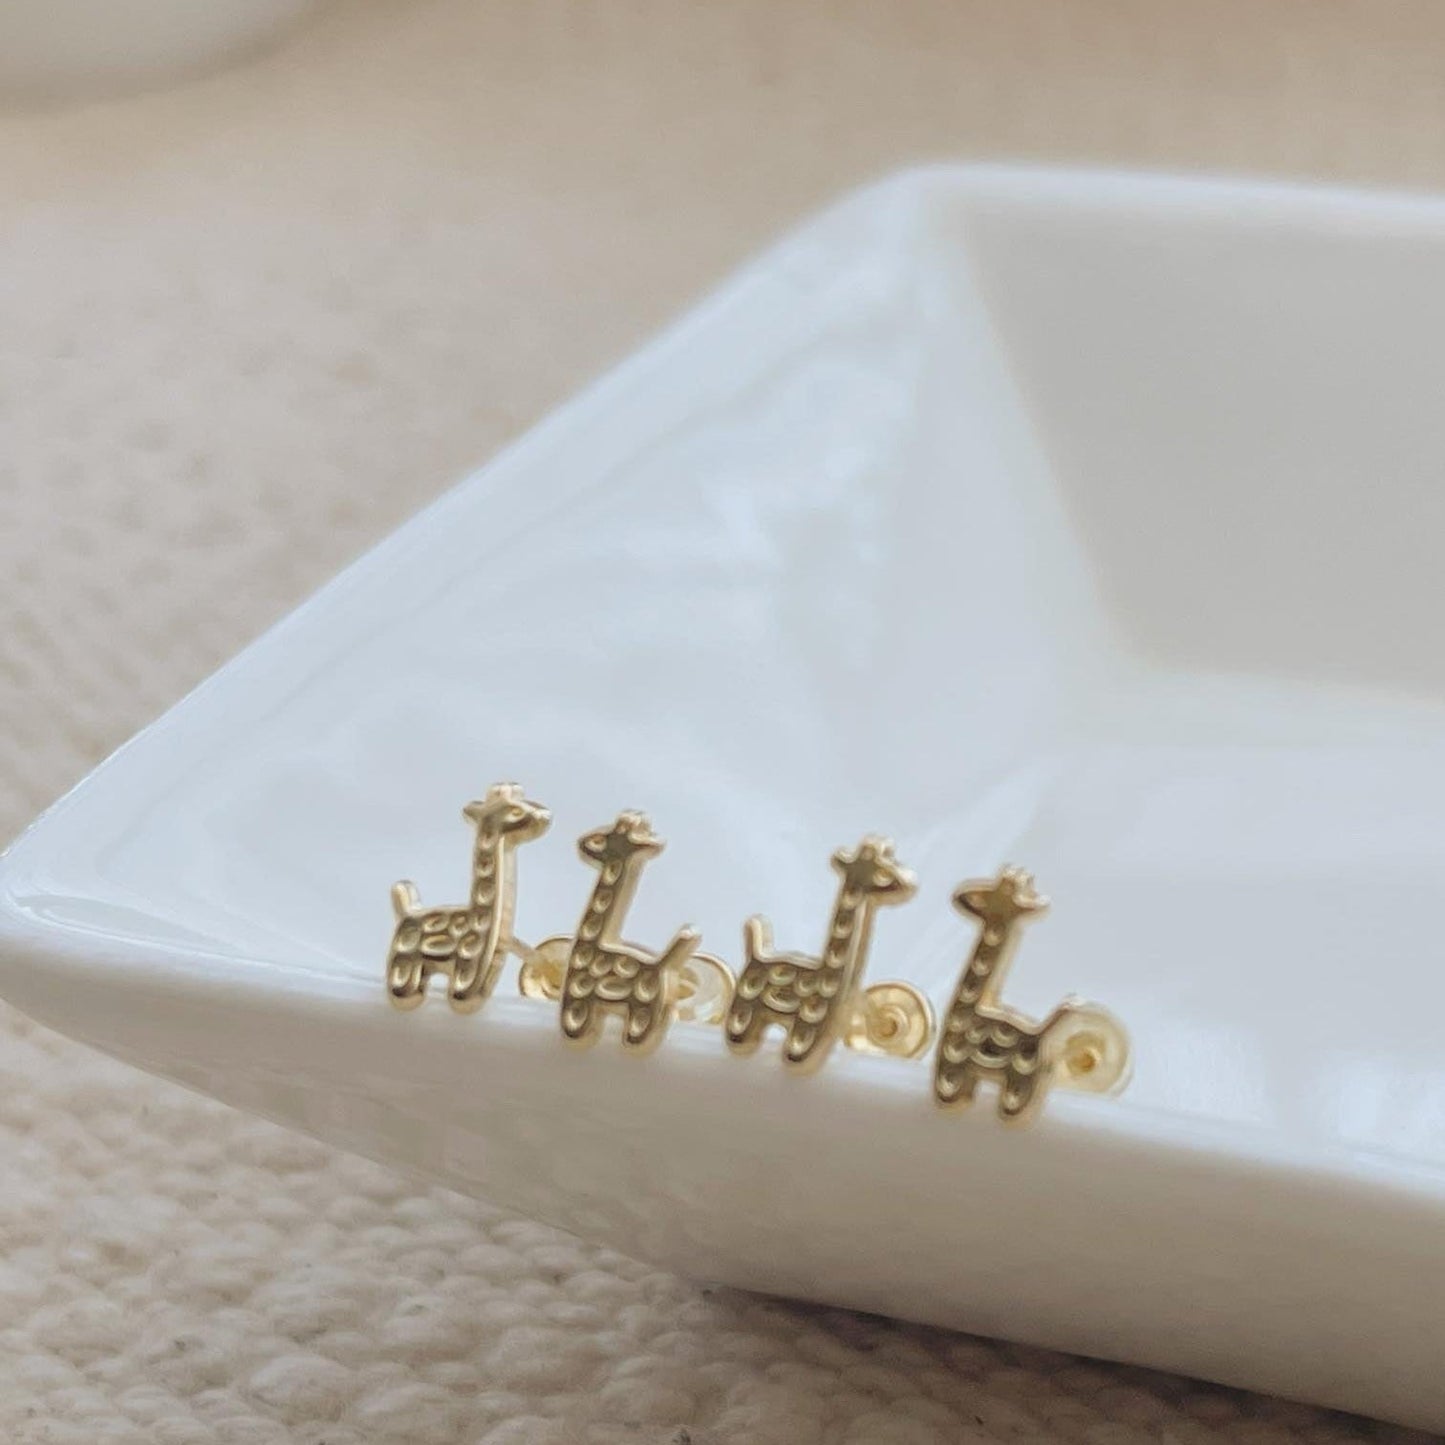 This giraffe stud earrings is perfect gift for animal lovers and it's hypoallergenic